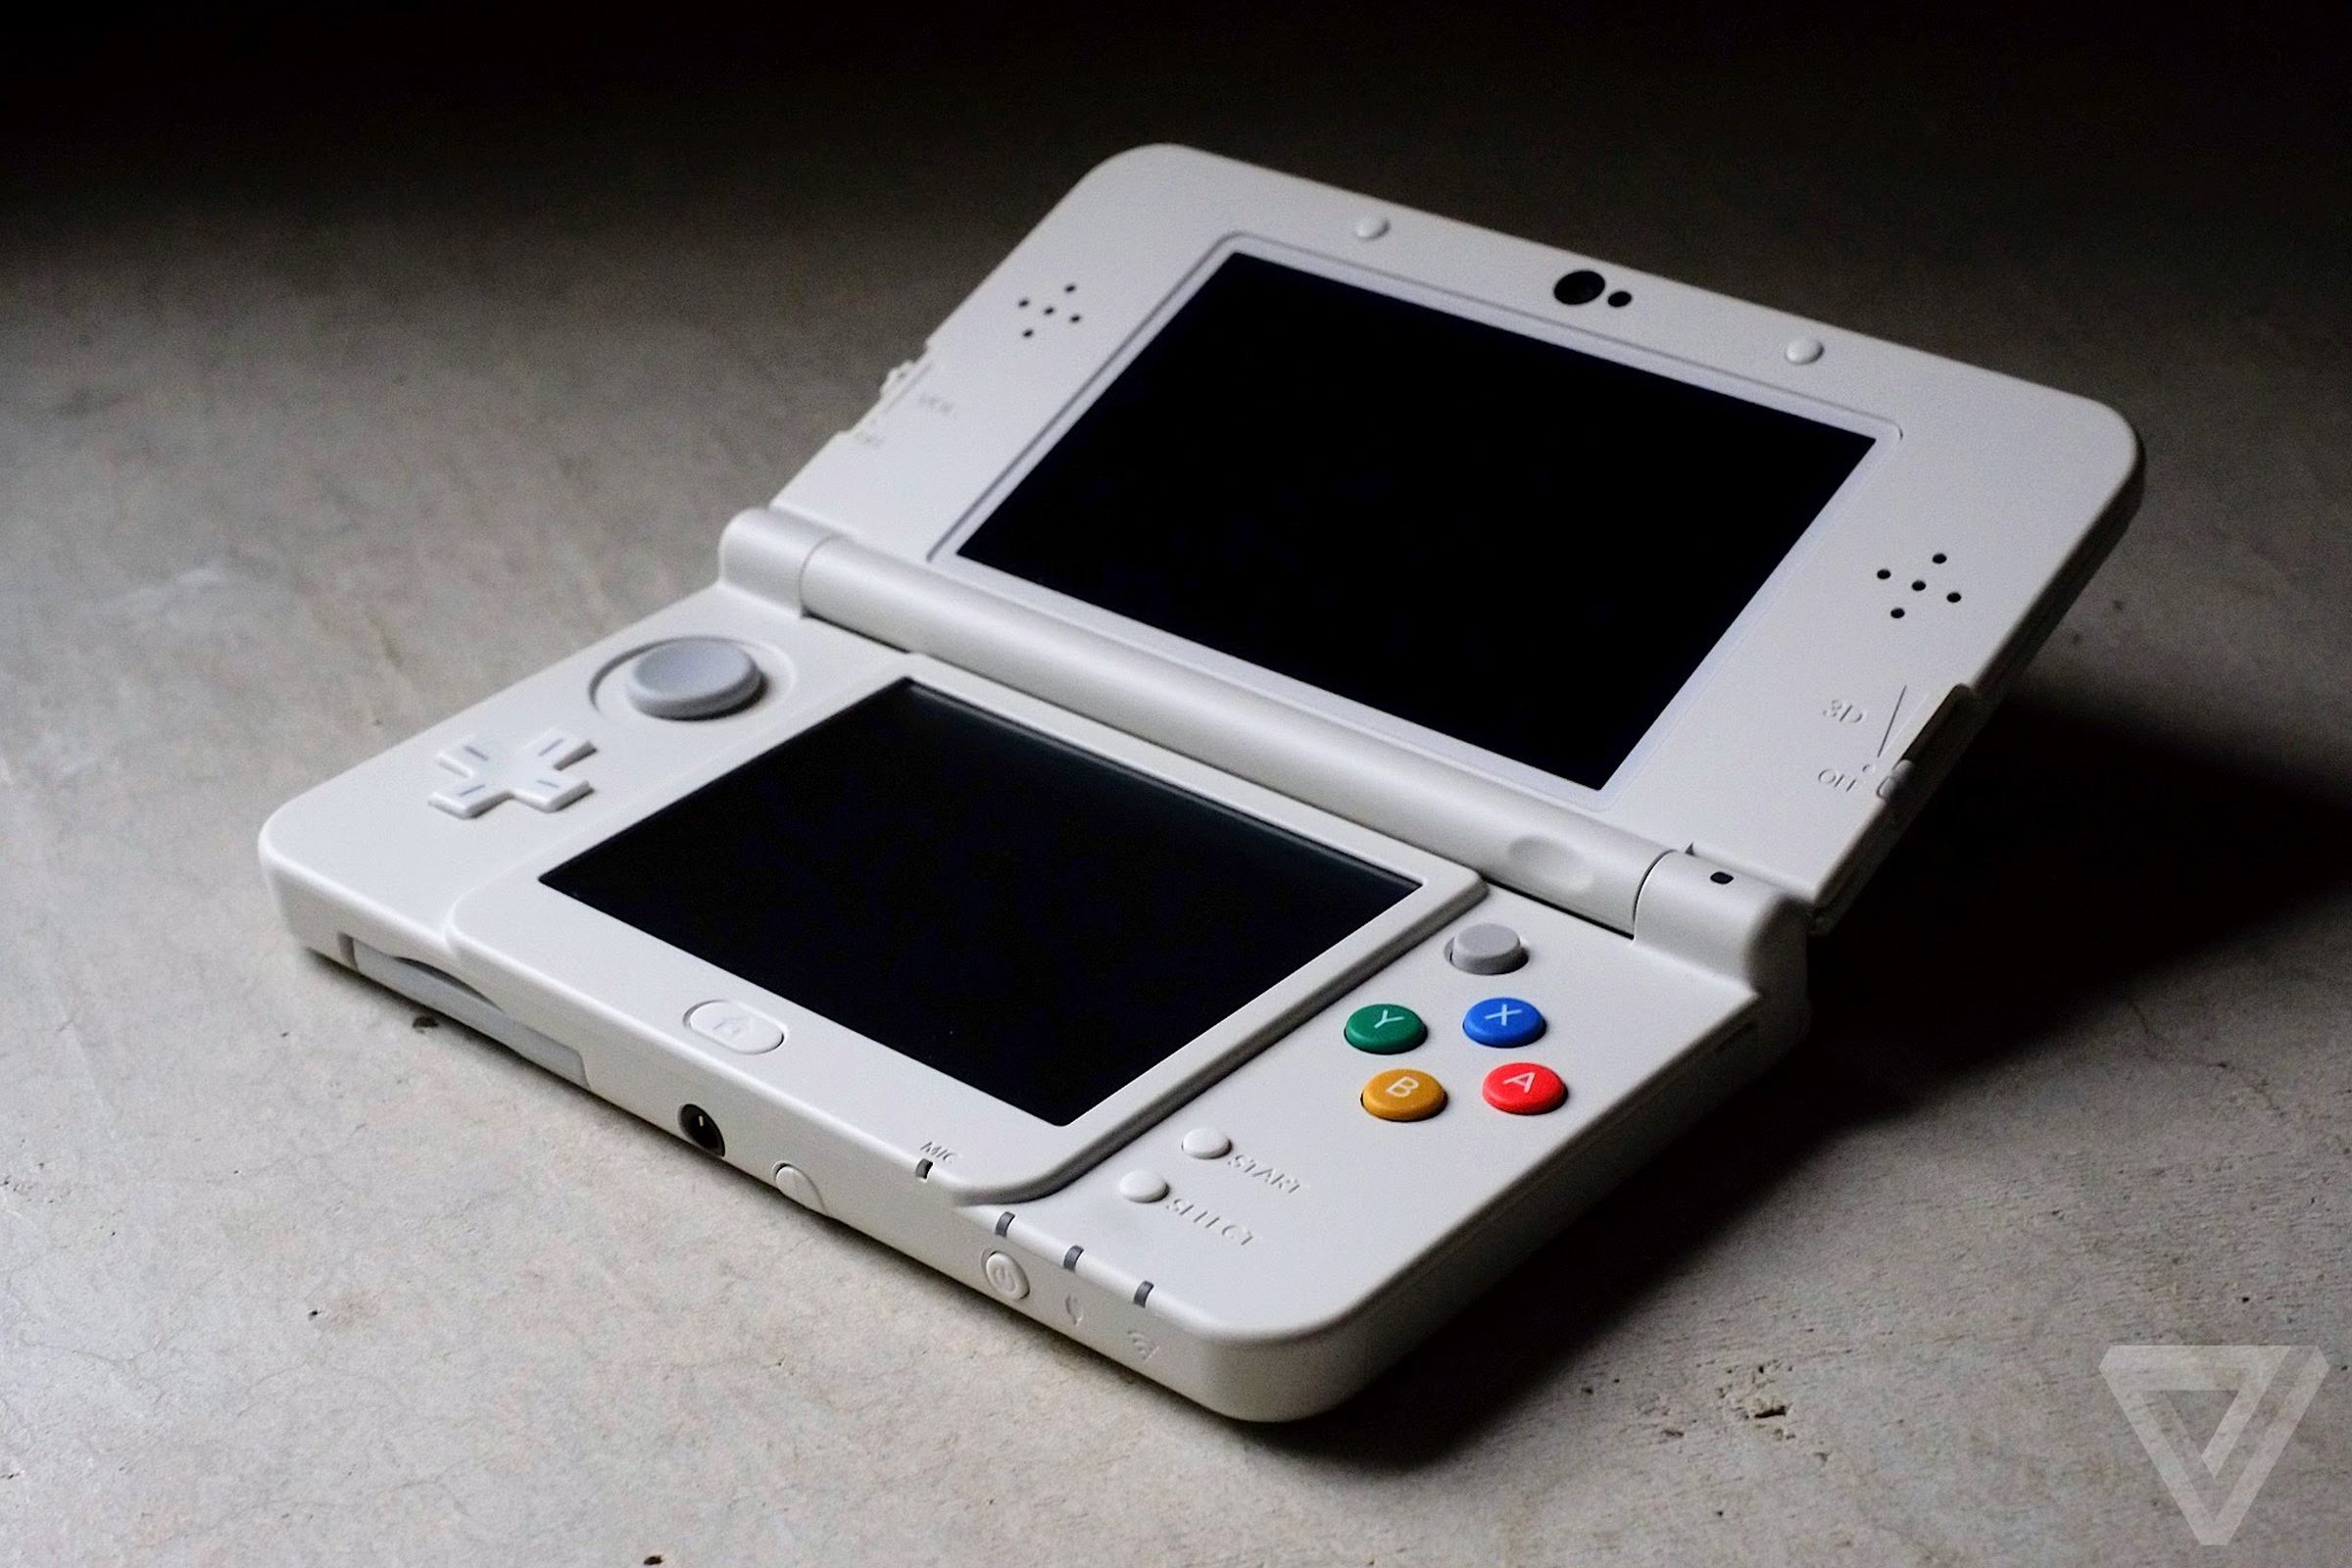 The New Nintendo 3DS was a rare consumer example of an autostereoscopic screen with face-tracking — but it came too late to save that wave of 3D screens.